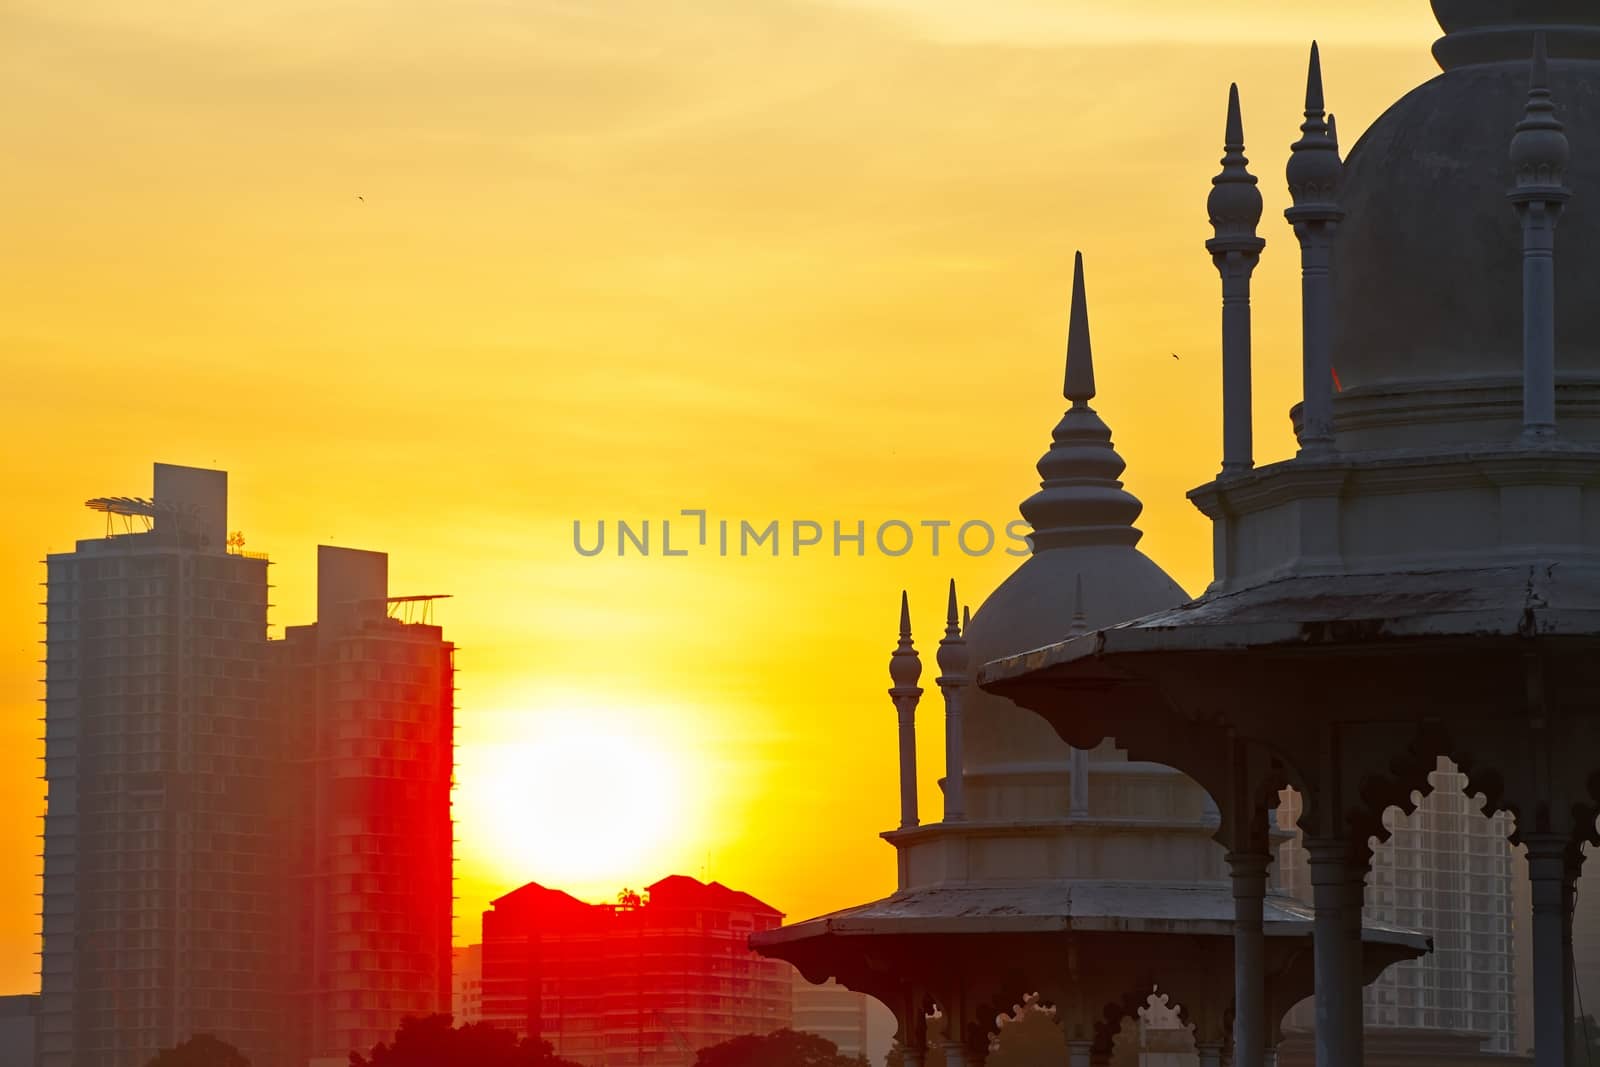 Towers of the historical building railway station in Kuala Lumpur at sunrise.